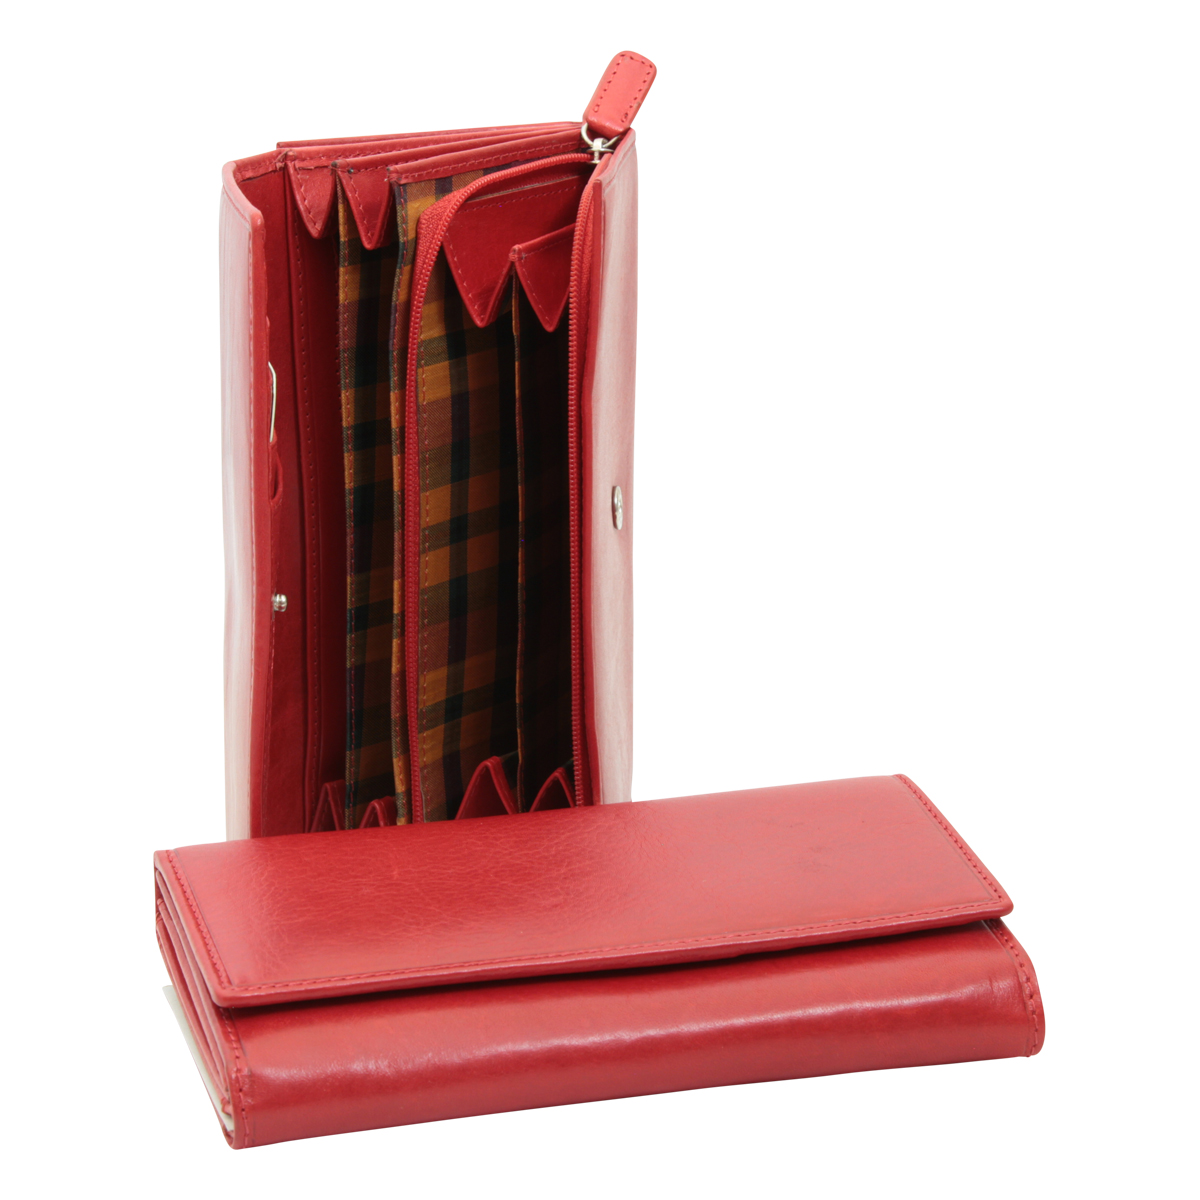 Women's leather wallet - red|503289RO|Old Angler Firenze